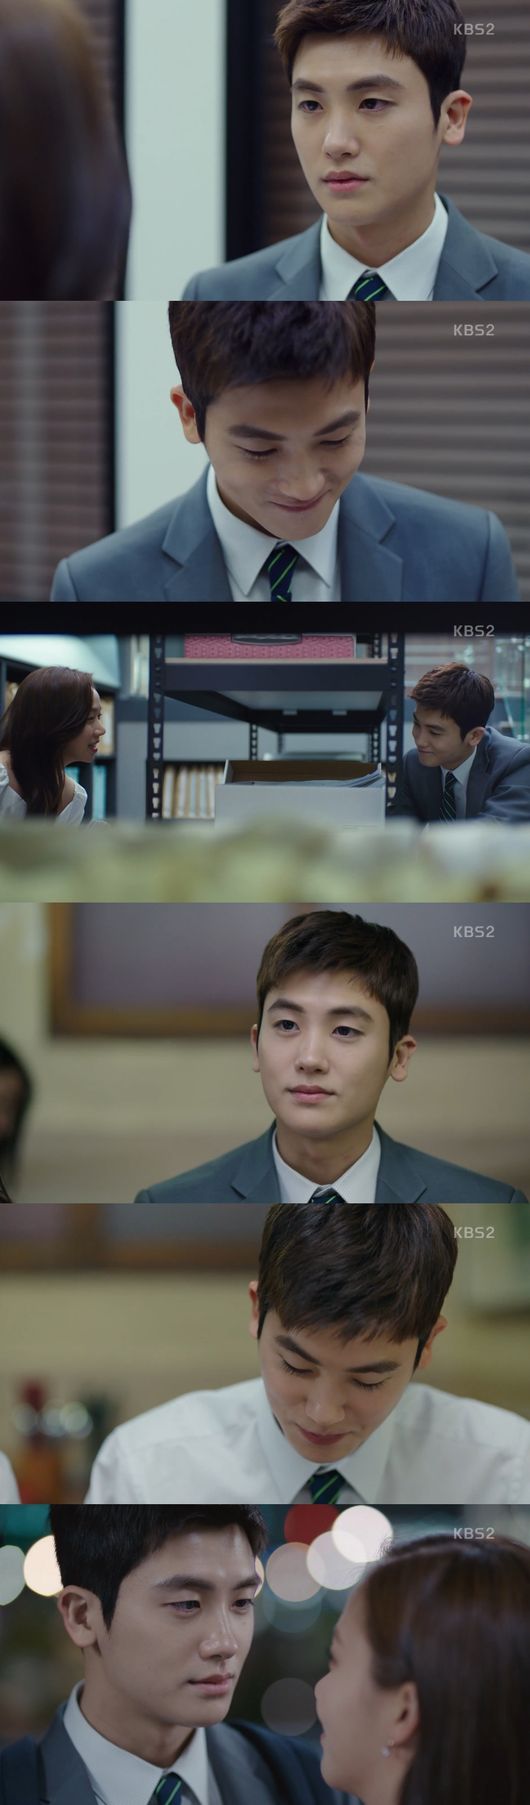 Suits Park Hyung-sik is a cute man when he loves.A man with a genius matching king who never forgets when he sees and understands it.He is a brain-sexy man who memorizes a whole book that is difficult to read and knows all the records of a few years ago.The woman in the house theater is bound to shake.KBS 2TV Wednesday-Thursday evening drama Suits (played by Kim Jung-min/directed by Kim Jin-woo/produced monster union, Enter Media Pictures) is a story about Park Hyung-sik (played by Ko Yeon-woo).Park Hyung-sik plays a genius matching king in Suits, and a fake new lawyer, Ko Yeon-woo, who has empathy, and faces viewers.In the play, Ko Yeon-woo is a person who needs to show his own growth story as well as his romance with Choi Kang-seok (Jang Dong-gun).Park Hyung-sik shows his unique character expression ability and draws his own color with his own color and Suits.In the 13th episode of Suits, which aired on the 6th, the special charm of the character, such as Ko Yeon-woo, was noticeably outstanding in the expression of Park Hyung-sik, which sensibly captures it.At the center was the keyword Love, a radical romance of a rabbit couple who showed a thrilling kiss on the last broadcast.On this day, Ko Yeon-woo showed his sorry that he failed to keep his dinner promise and approached Ji-na Kim (Go Sung-hee).I just started to love, such as hovering around her or talking to her, but I saw the cuteness of a man who was still in love.In addition, Ji-na Kim and her grandmother, or even the proposal, but the scene of the ring was not enough to add to the pinkish excitement of the house theater.The decisive reason why the house theater cheers on Ko Yeon-woos love is because it shows a reversal from the existing character called Genius.It is a poor and awkward appearance in front of love, with a perfect memory of anything, excellent situation judgment and coping ability.It is a special charm of the character of Ko Yeon-woo to answer Yes honestly even though it seems to jump to the question whether he has not been in love.And above all, the expression of actor Park Hyung-sik, who perfectly captures the lovely charm of this kind of actor, can not be missed.Park Hyung-sik conveys all the true heart, excitement, throbbing, and affection with one eye depending on the situation.Here, we show the change of the character flexibly depending on who the opponent is.In fact, everyone will react slightly differently to each other, but it is not easy to express them in characters because they need sensual and detailed acting.But hes a man who changes more in front of love. He has no choice but to steal the audiences heart.Because of Park Hyung-sik, who thought it was only a romance, viewers also wait for Suits in front of TV.KBS 2TV Wednesday-Thursday Evening Drama Suits Capture